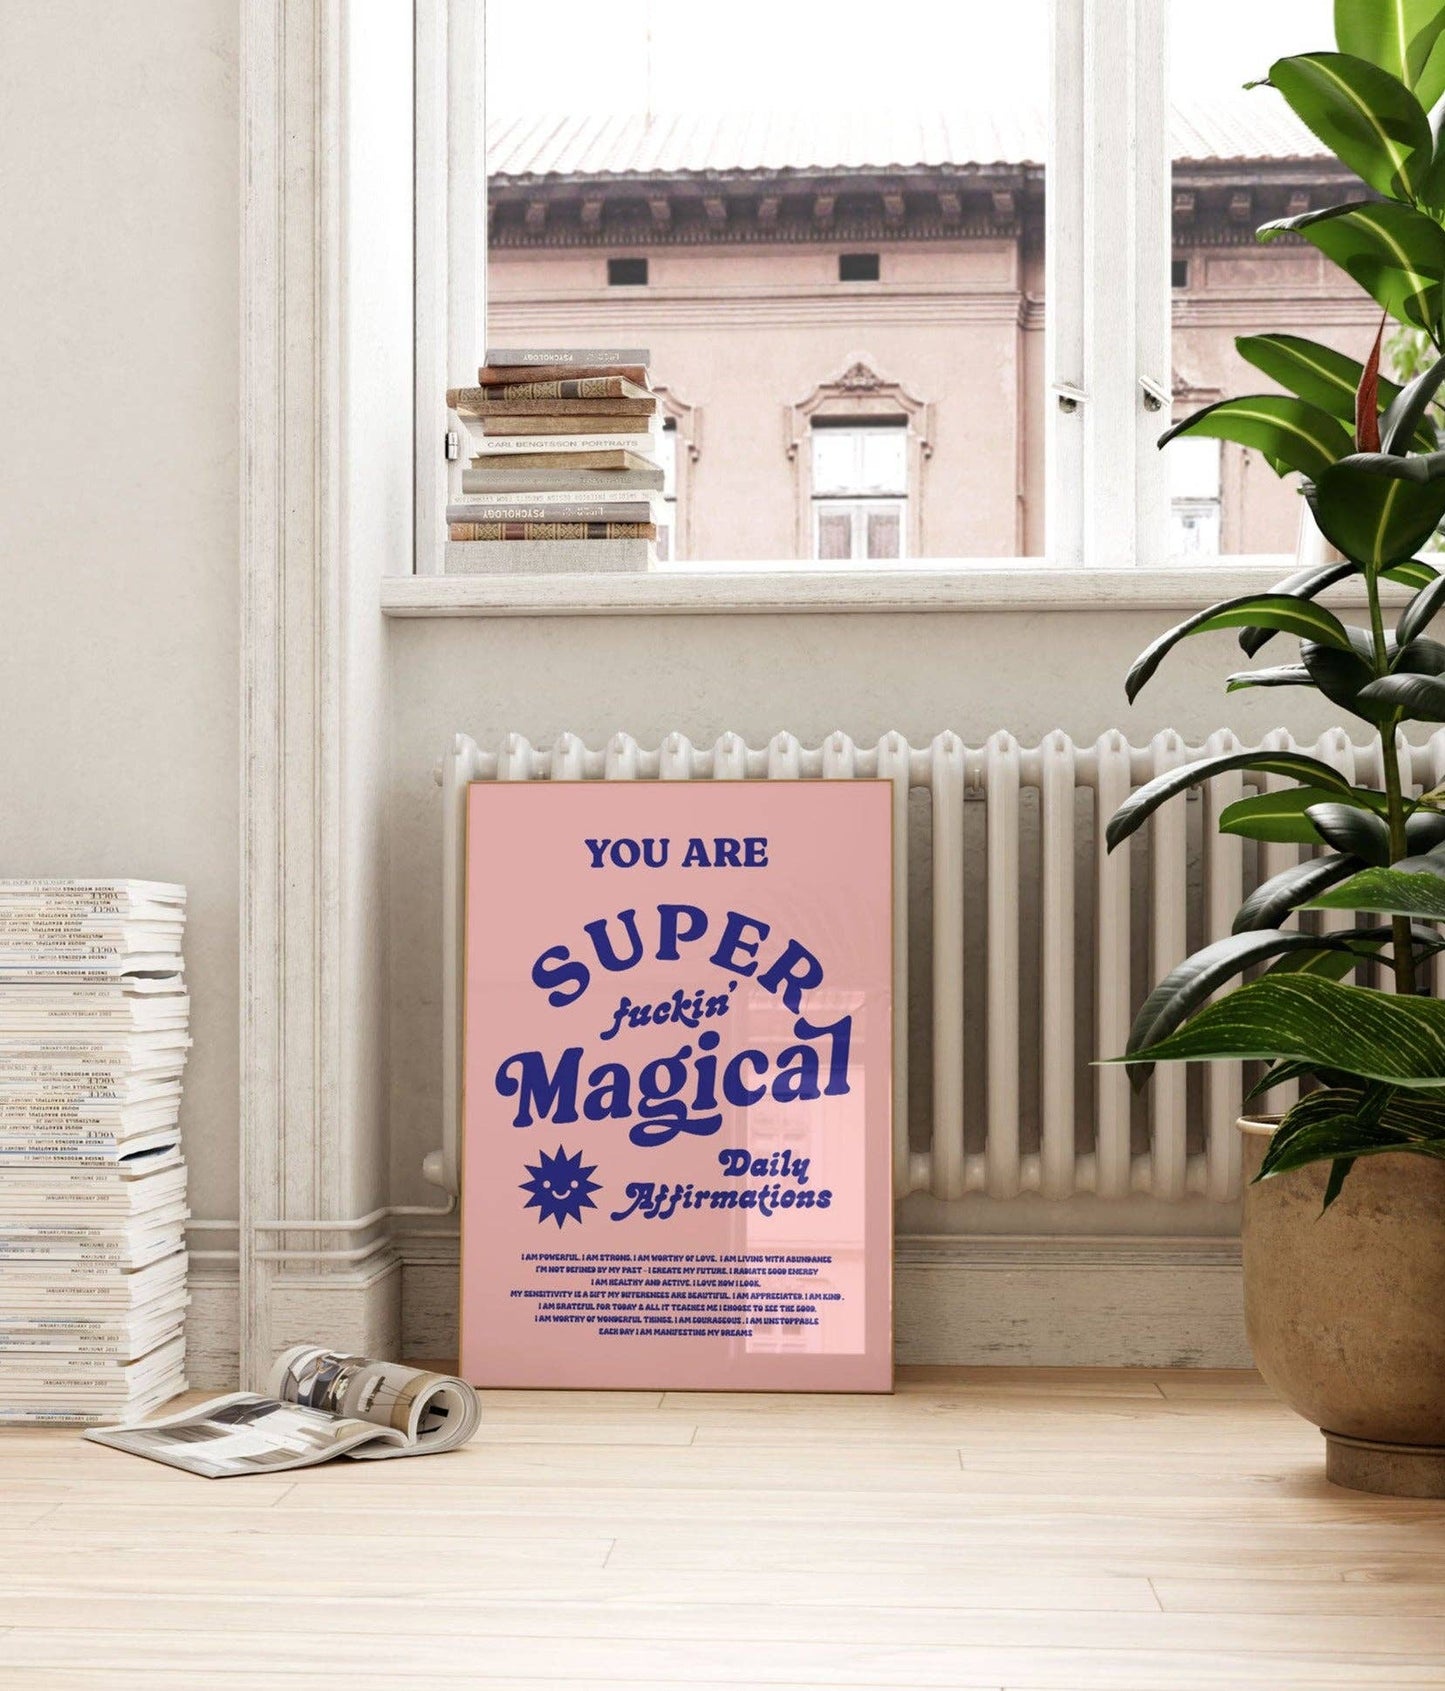 You Are Super F*ckin' Magical | Daily Affirmation Print